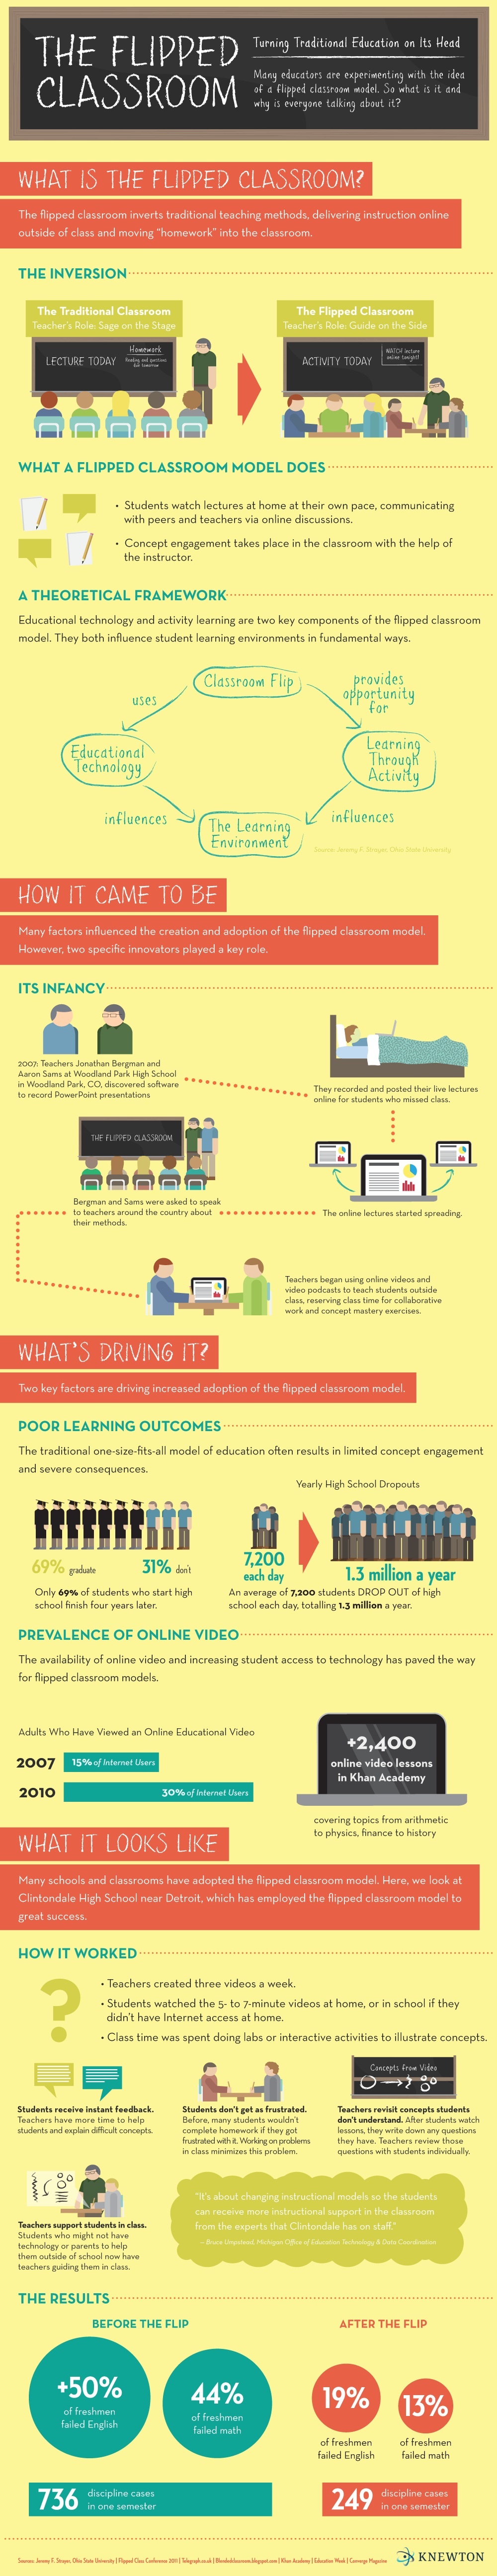 Flipped Classroom Infographic